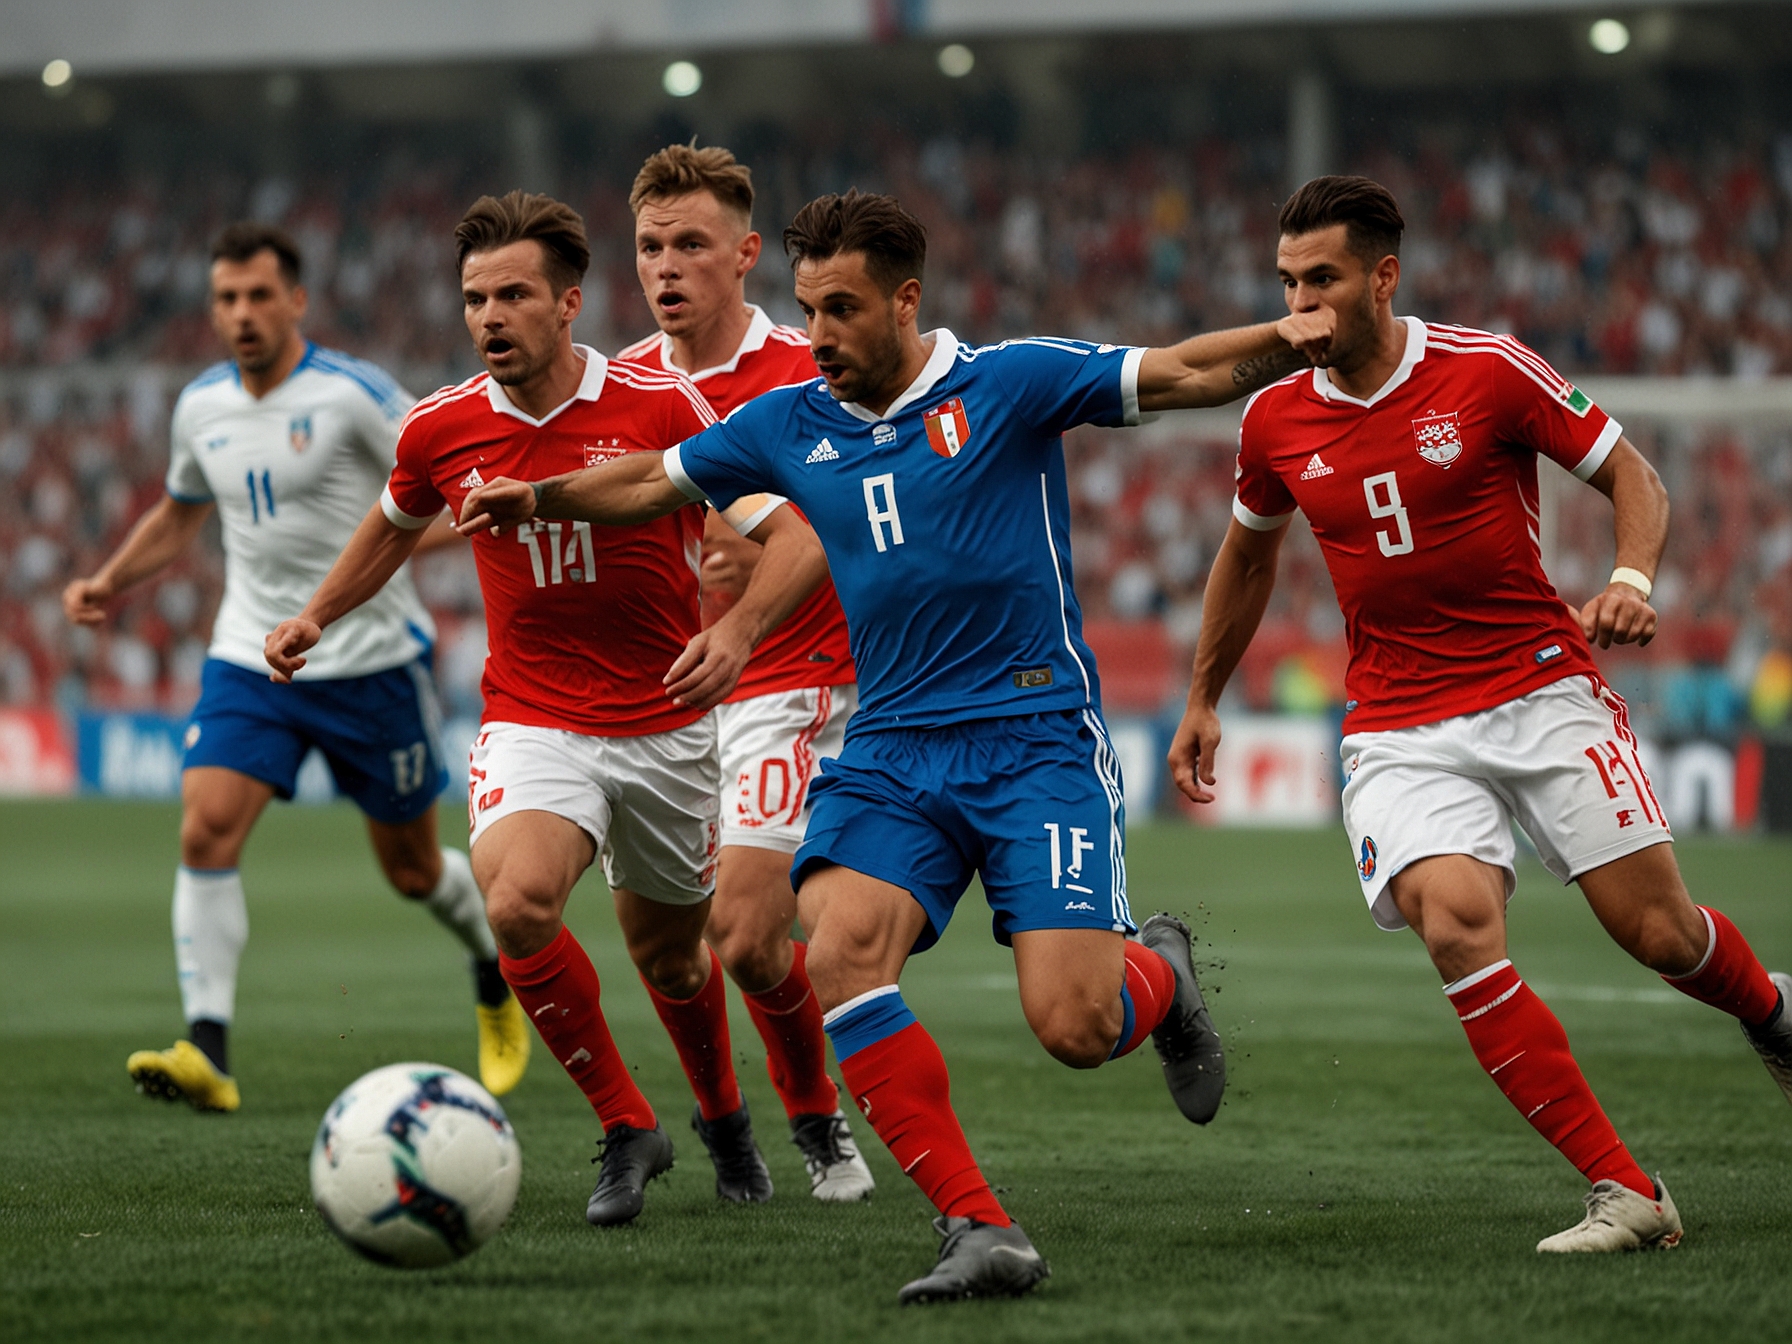 A thrilling moment captured during the Switzerland vs. Italy match, showcasing Swiss players pressing high while the Italian midfielders orchestrate play, emphasizing the tactical battle.